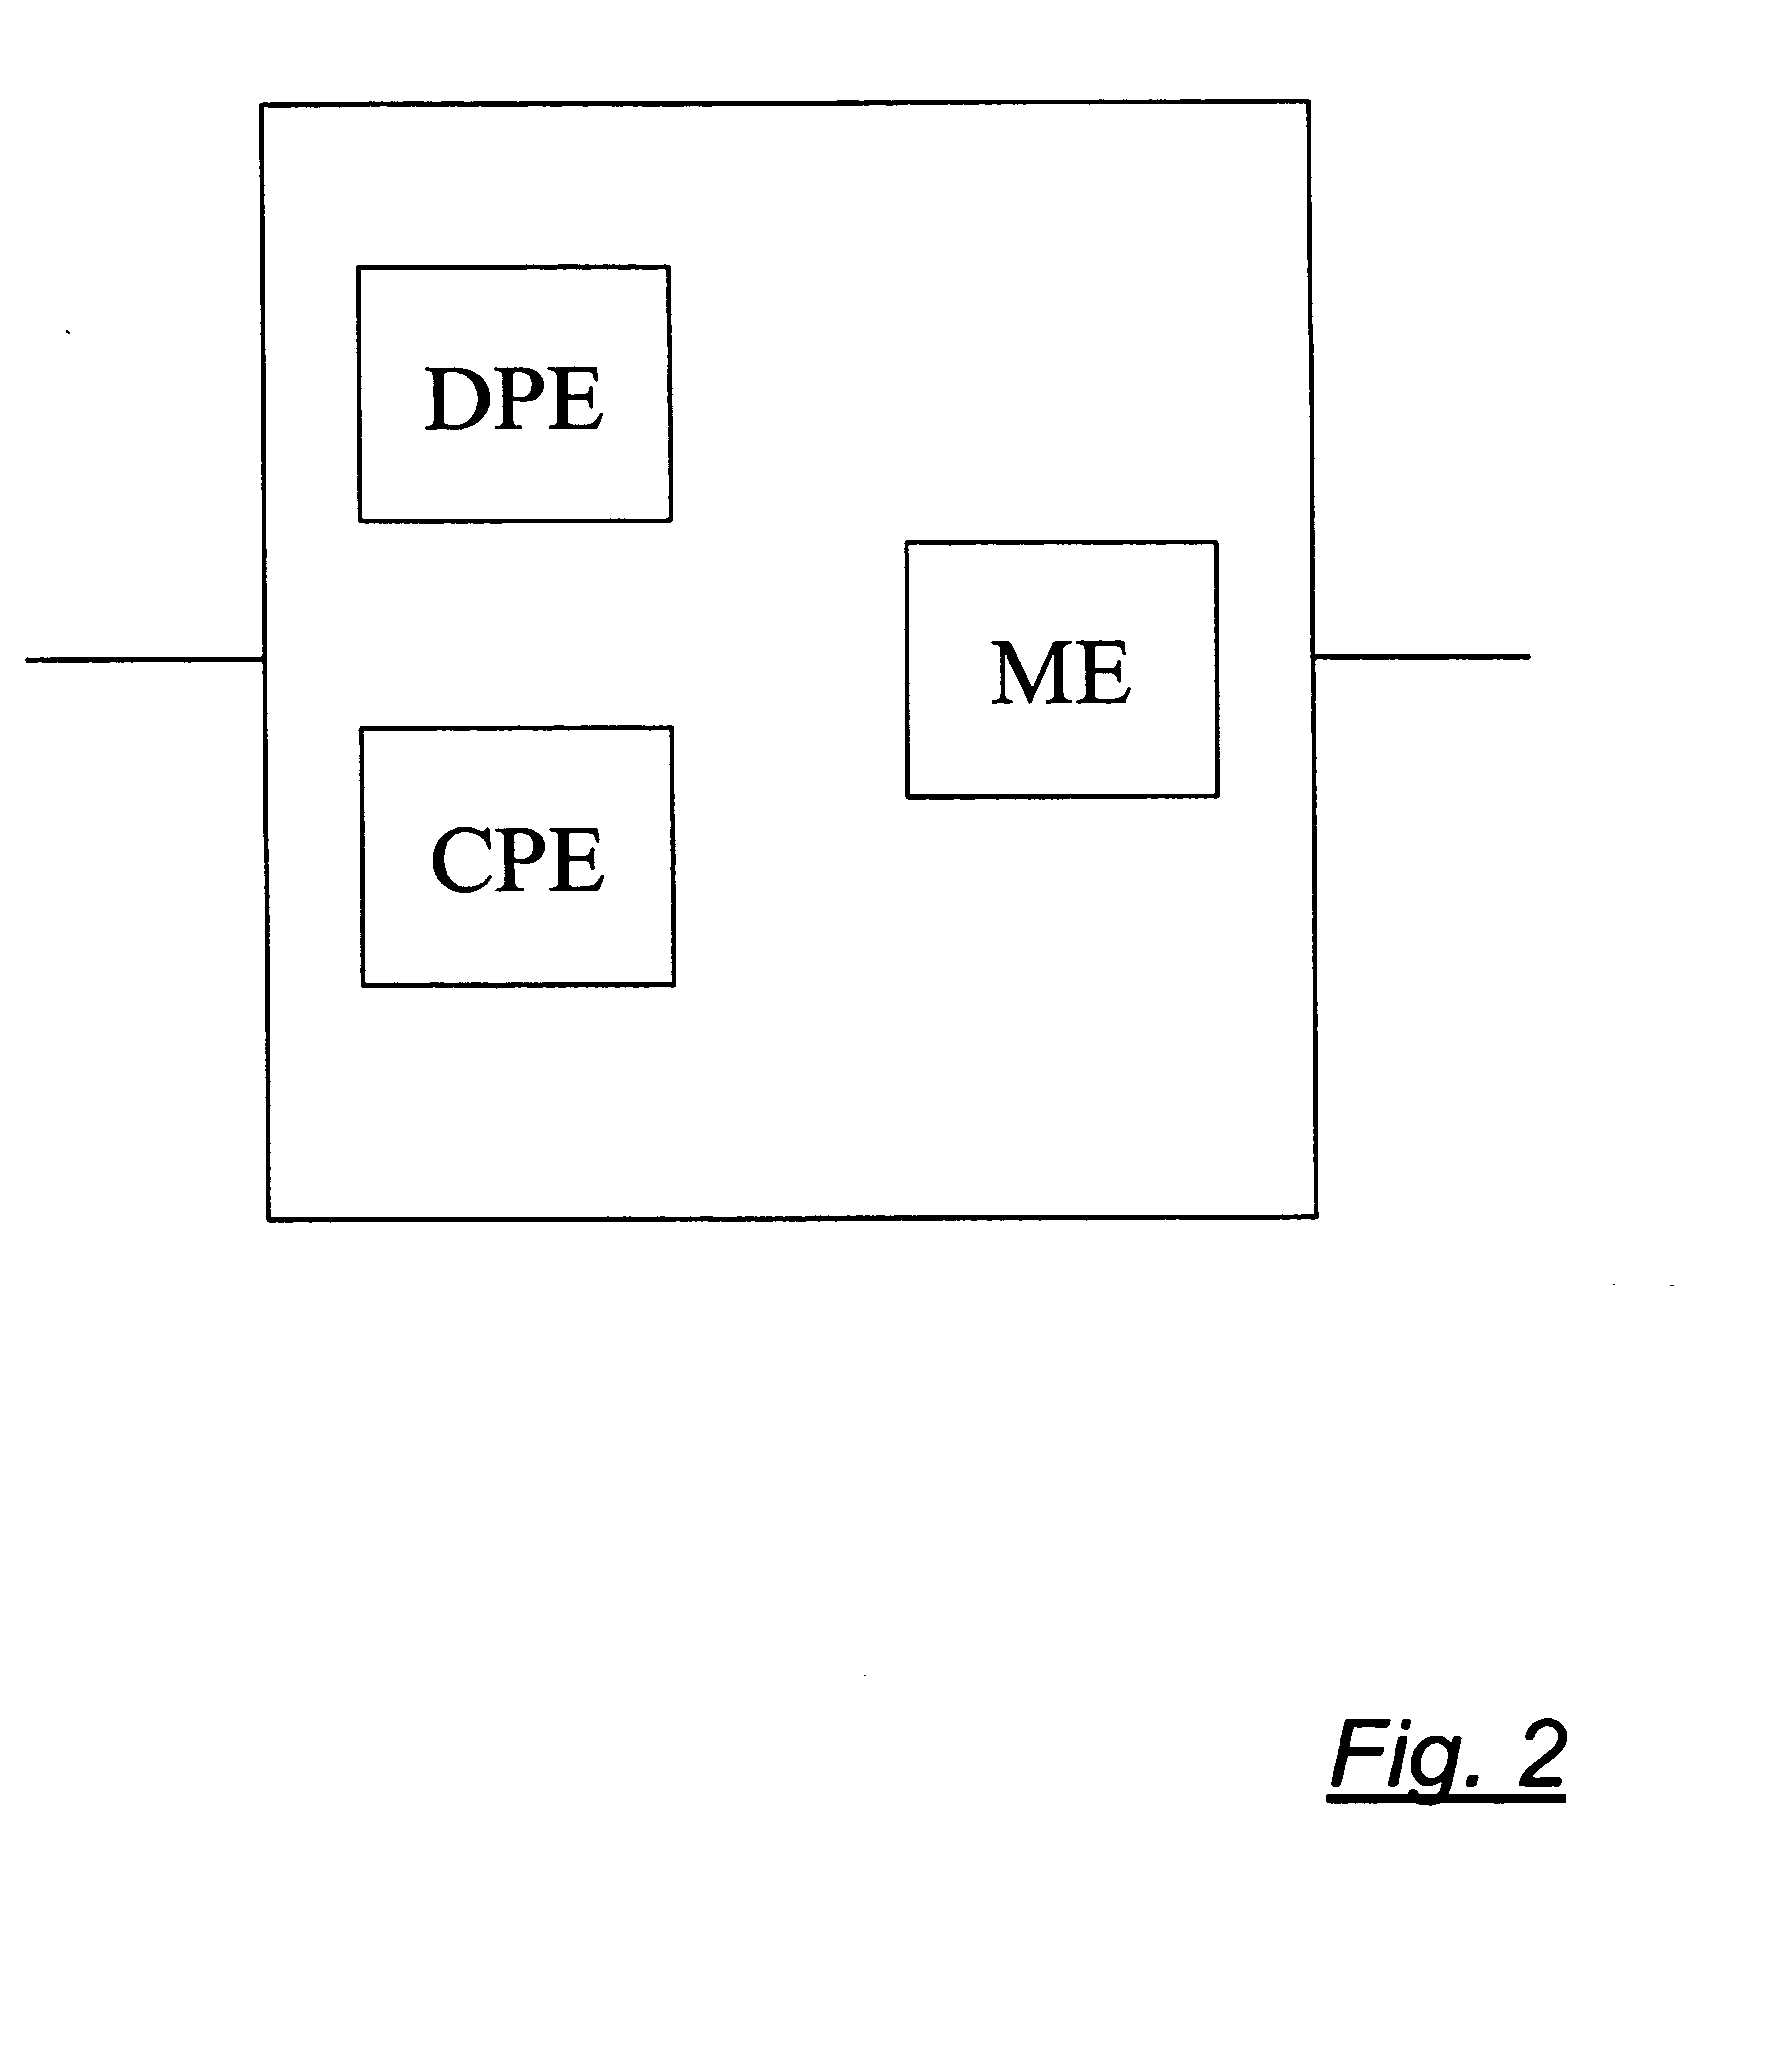 Method for restoring connections in a network